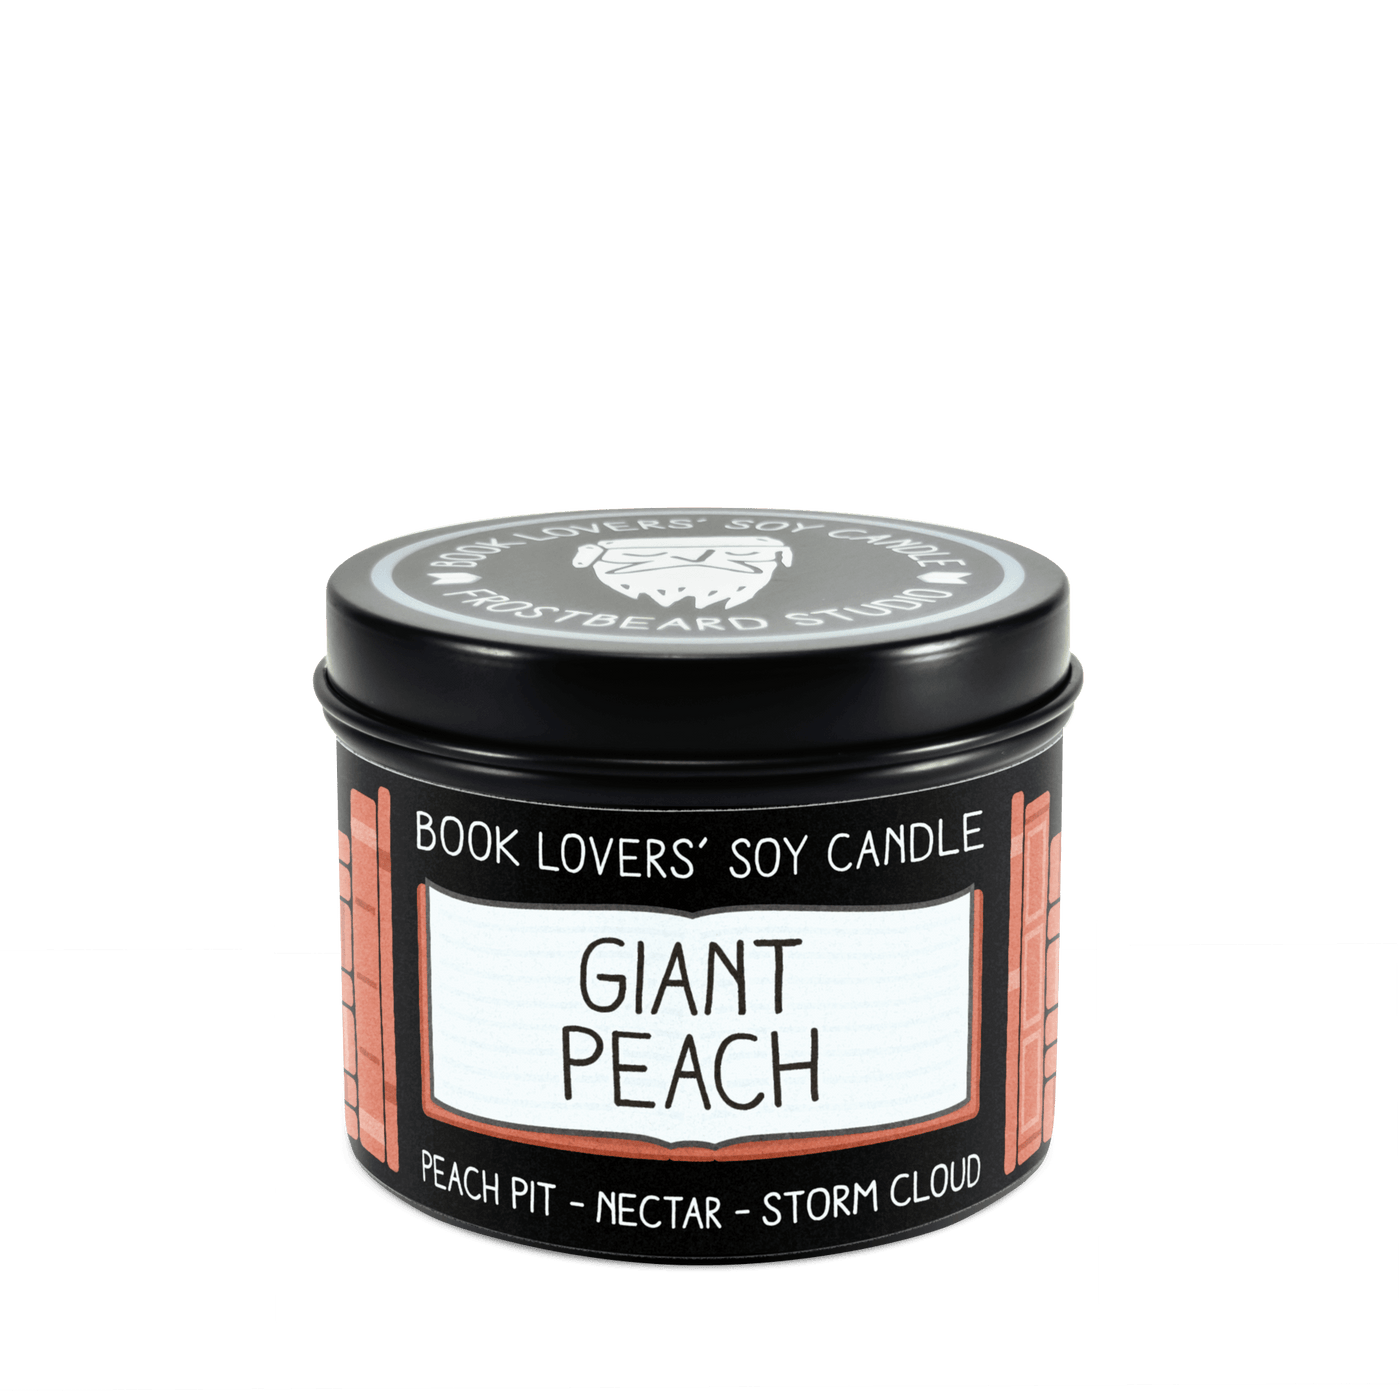 Giant Peach - 4 oz Tin - Book Lovers' Soy Candle - Frostbeard Studio